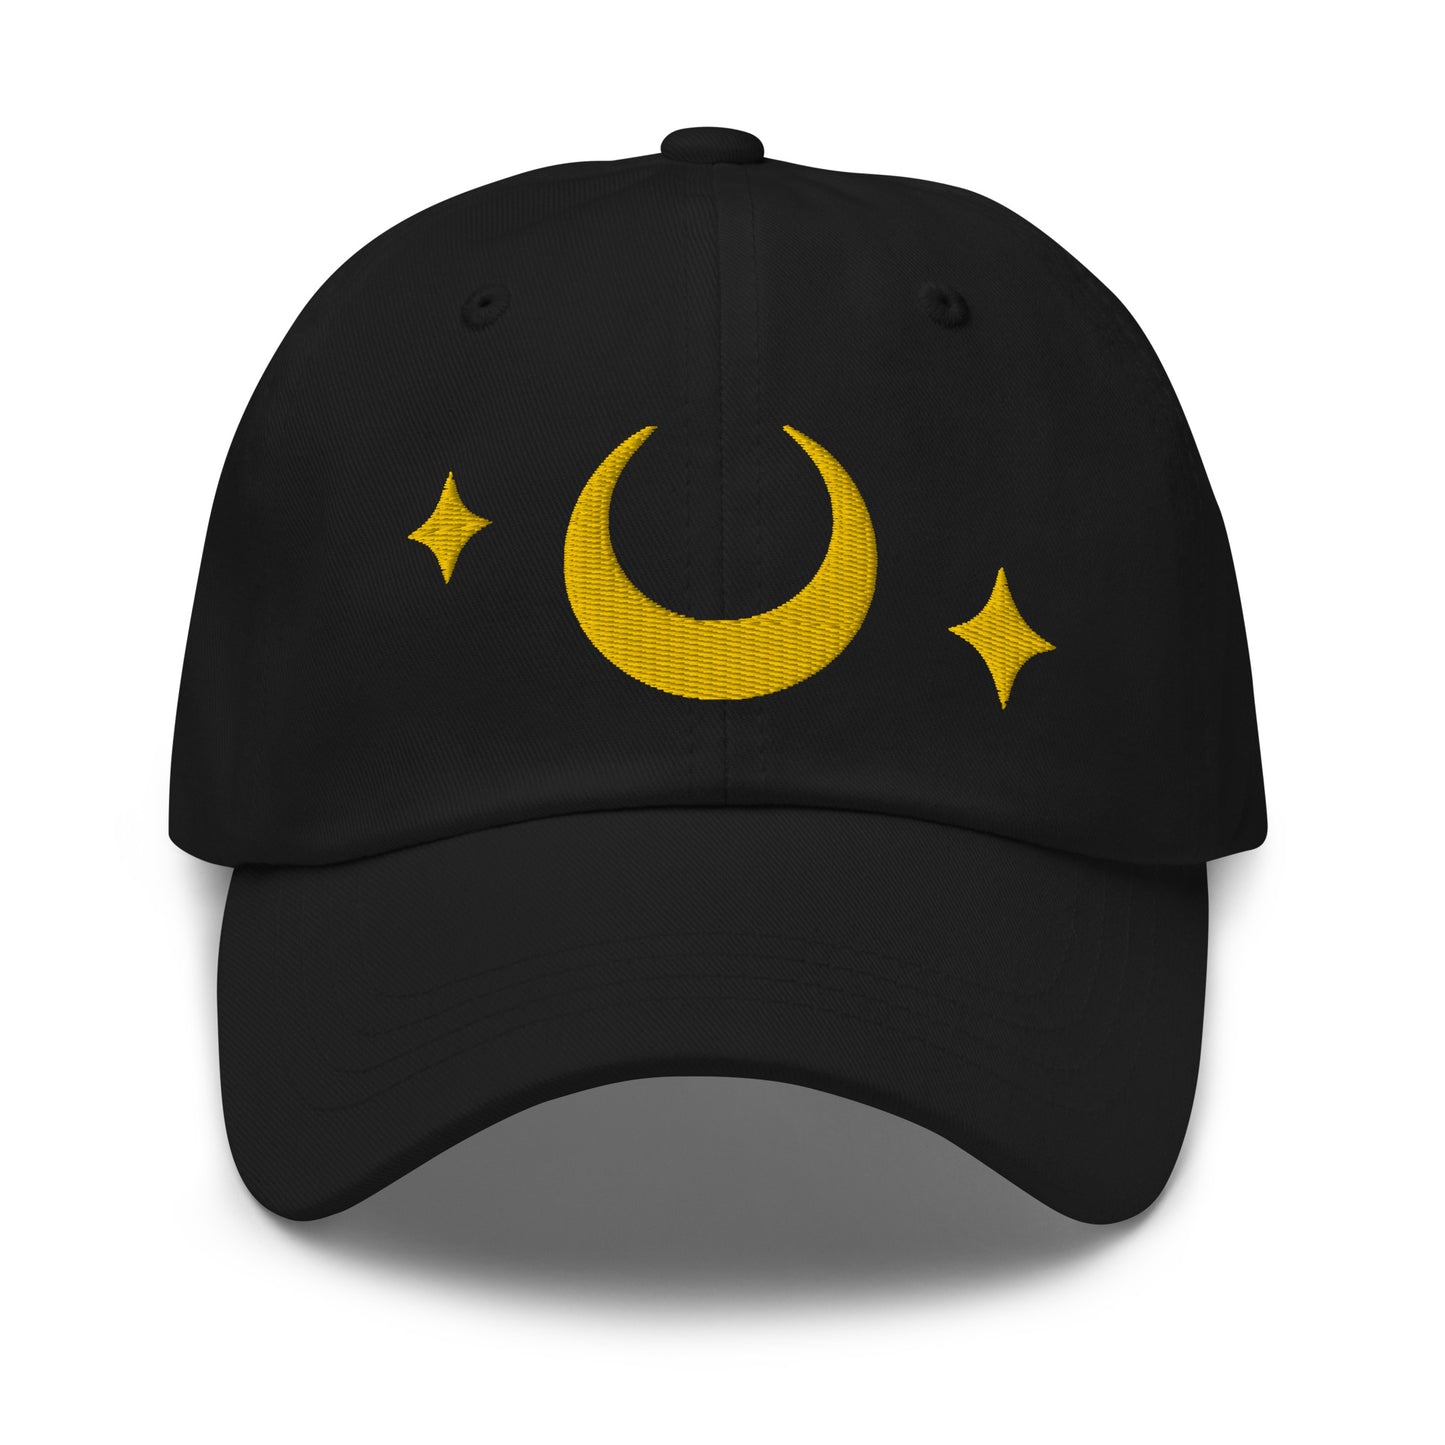 Moon Prism embroidered dad hat